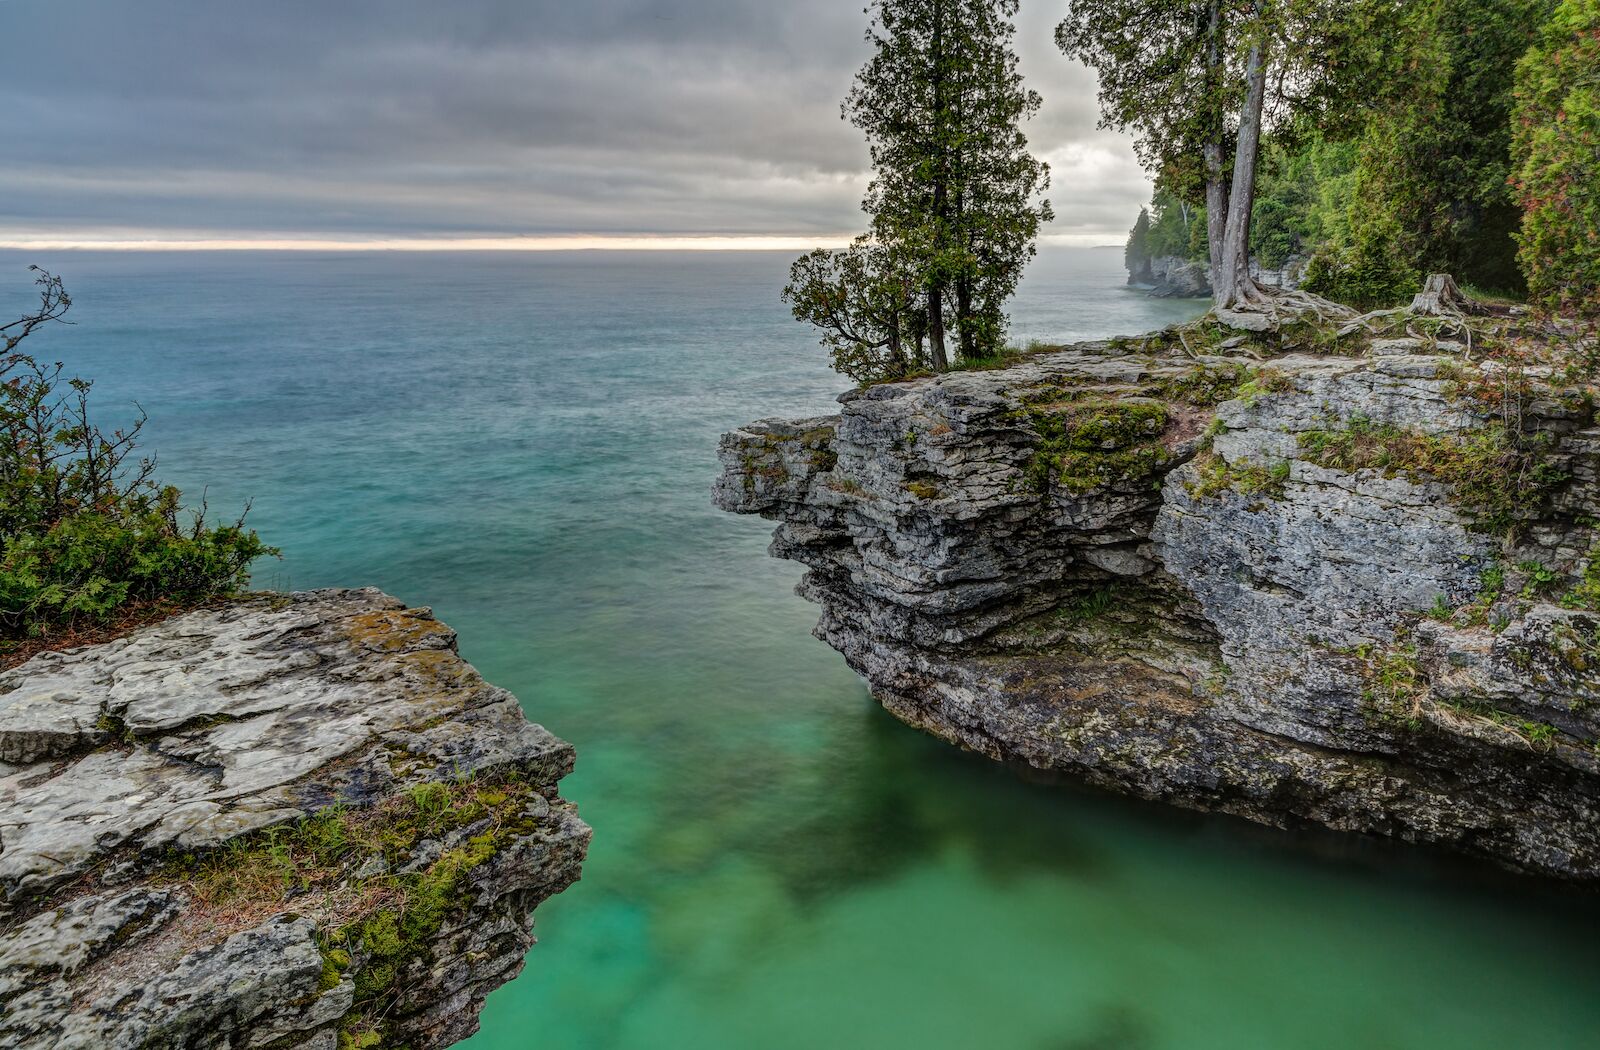 The rocky coast of Door County, Wisconsin's Cave Point displays beautiful colors in the light of a stormy sunrise.